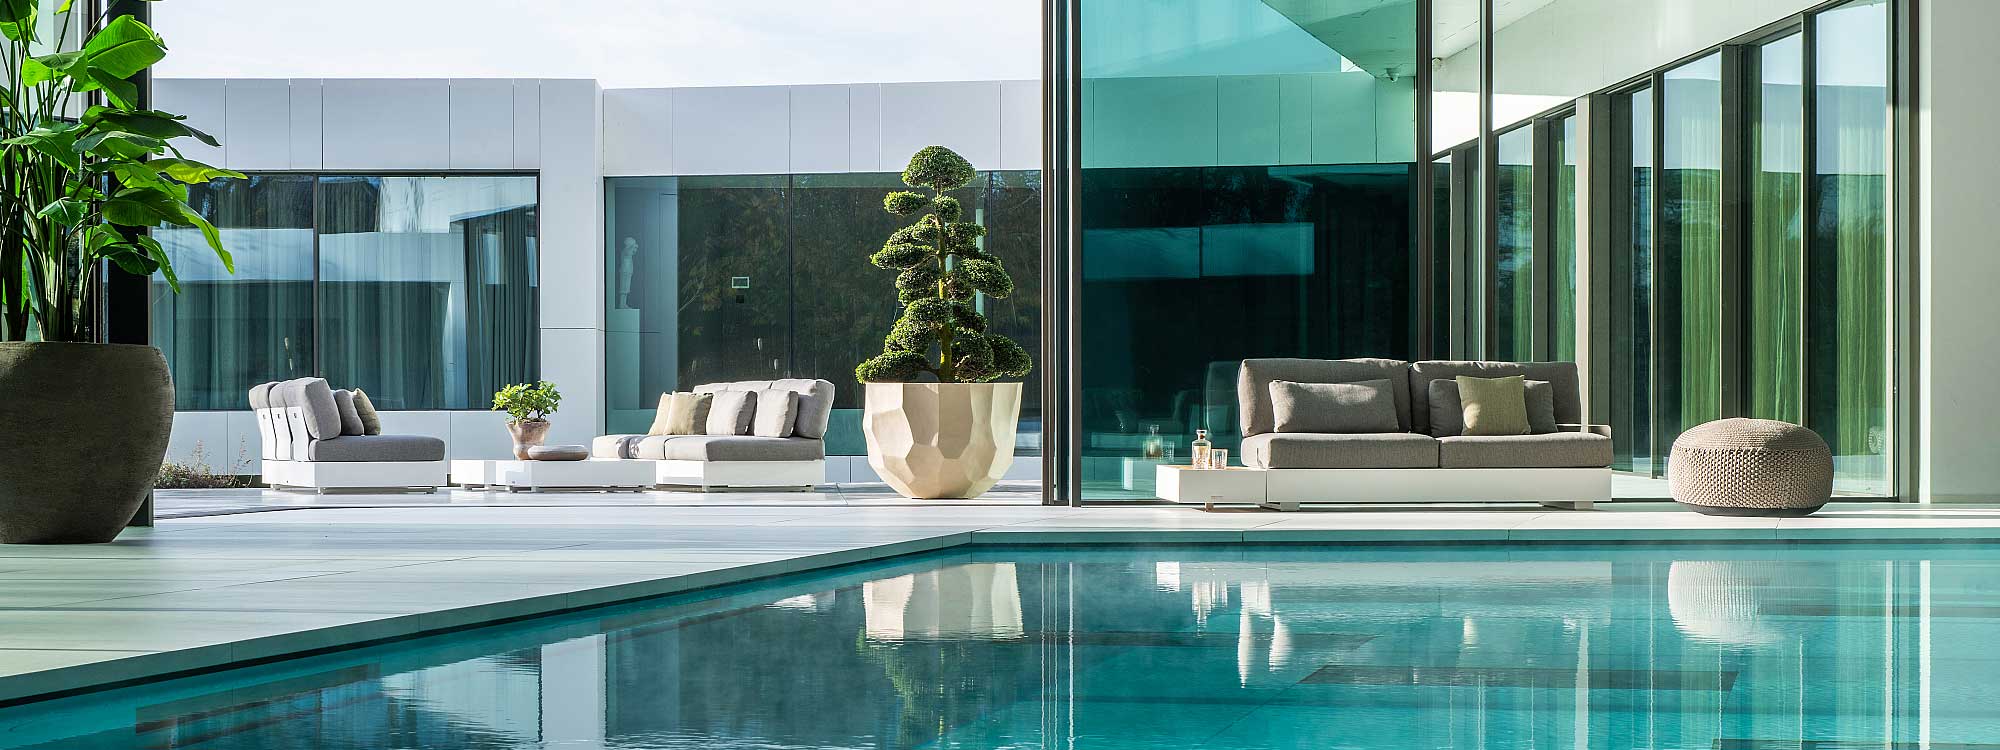 Image of Bari linear garden sofa in white aluminium with grey cushions, on indoor poolside next to large planter with cloud pruned Japanese holly